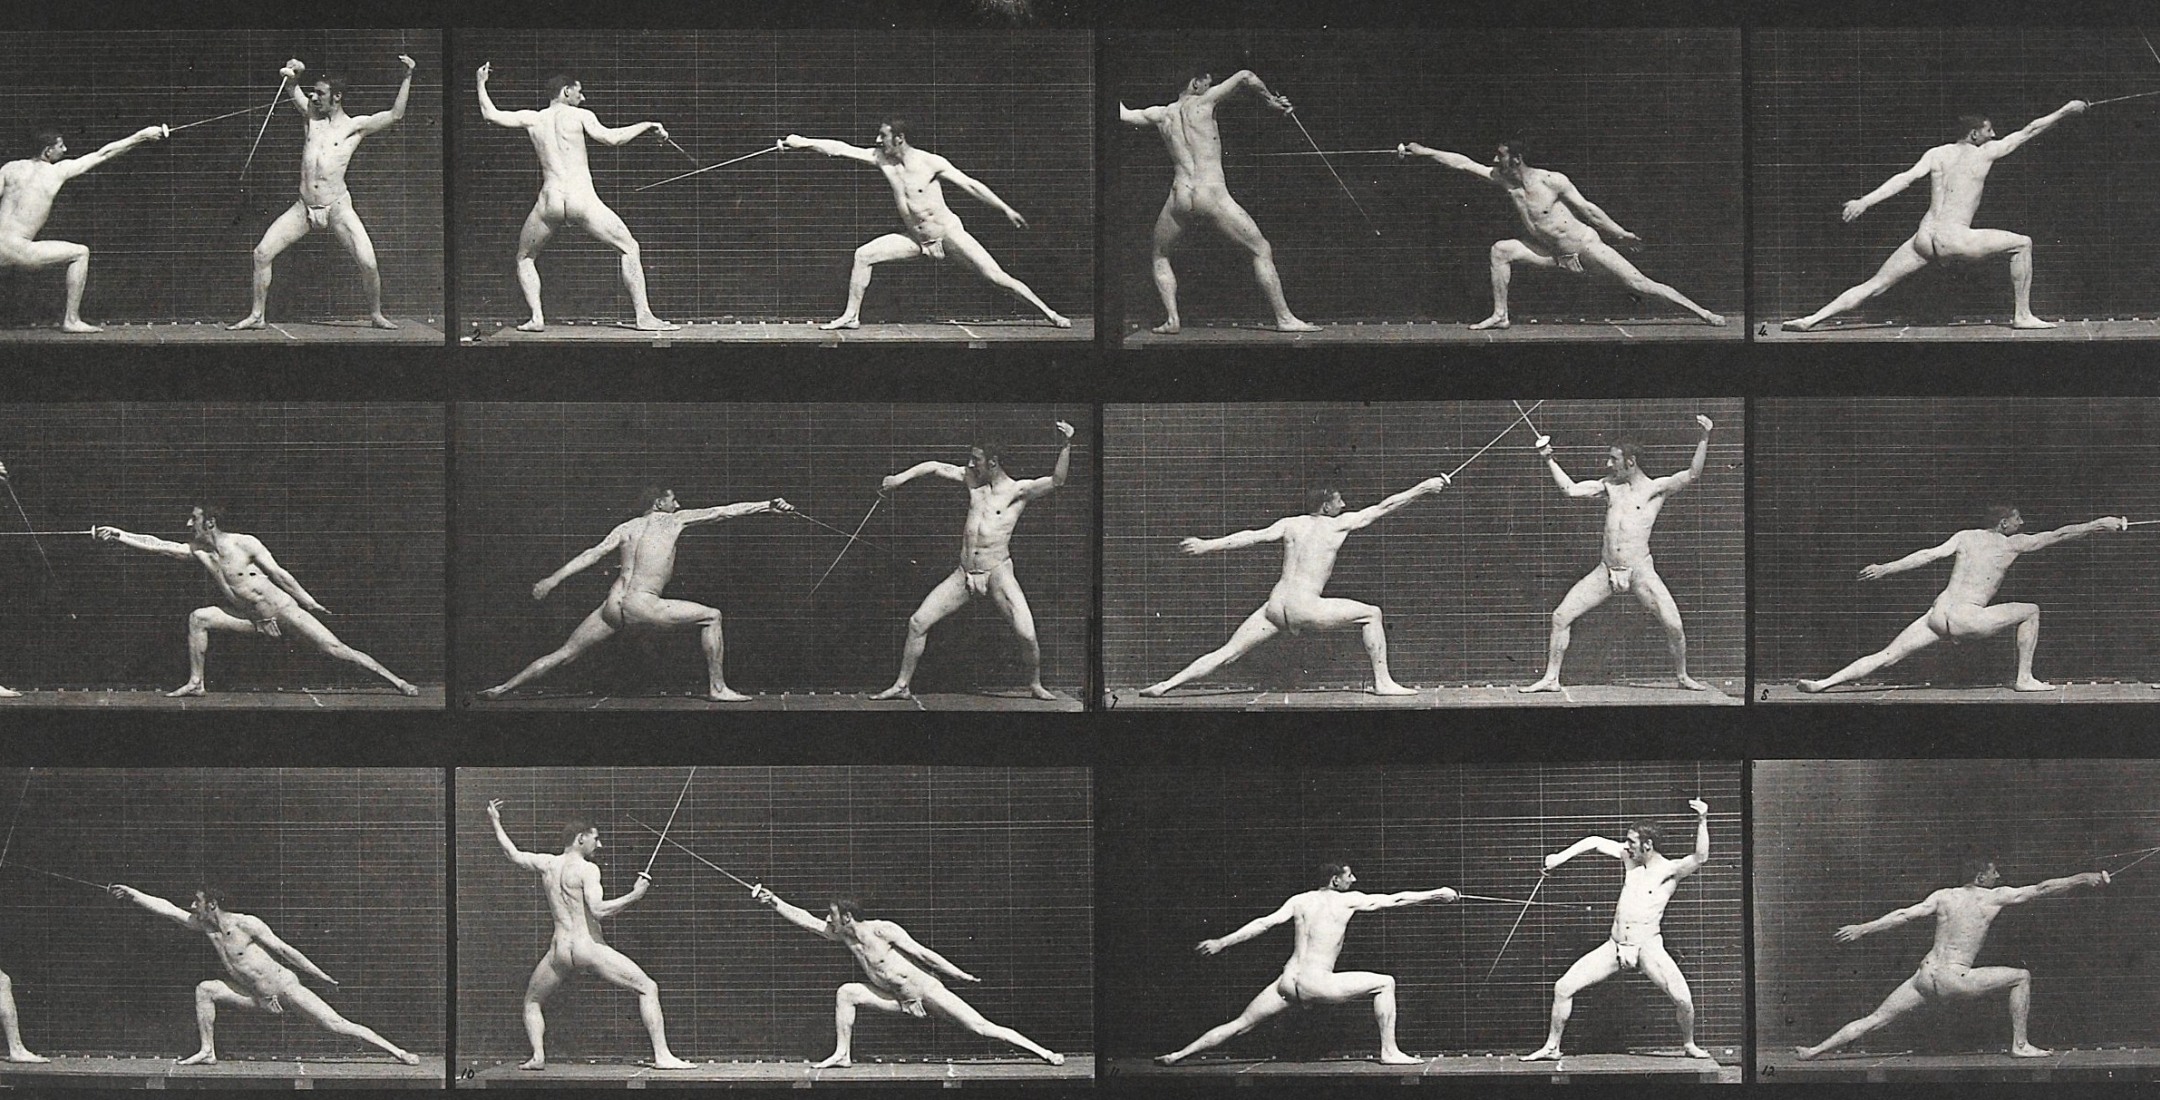 Sequence of black and white photos showing the motions of two men fencing.